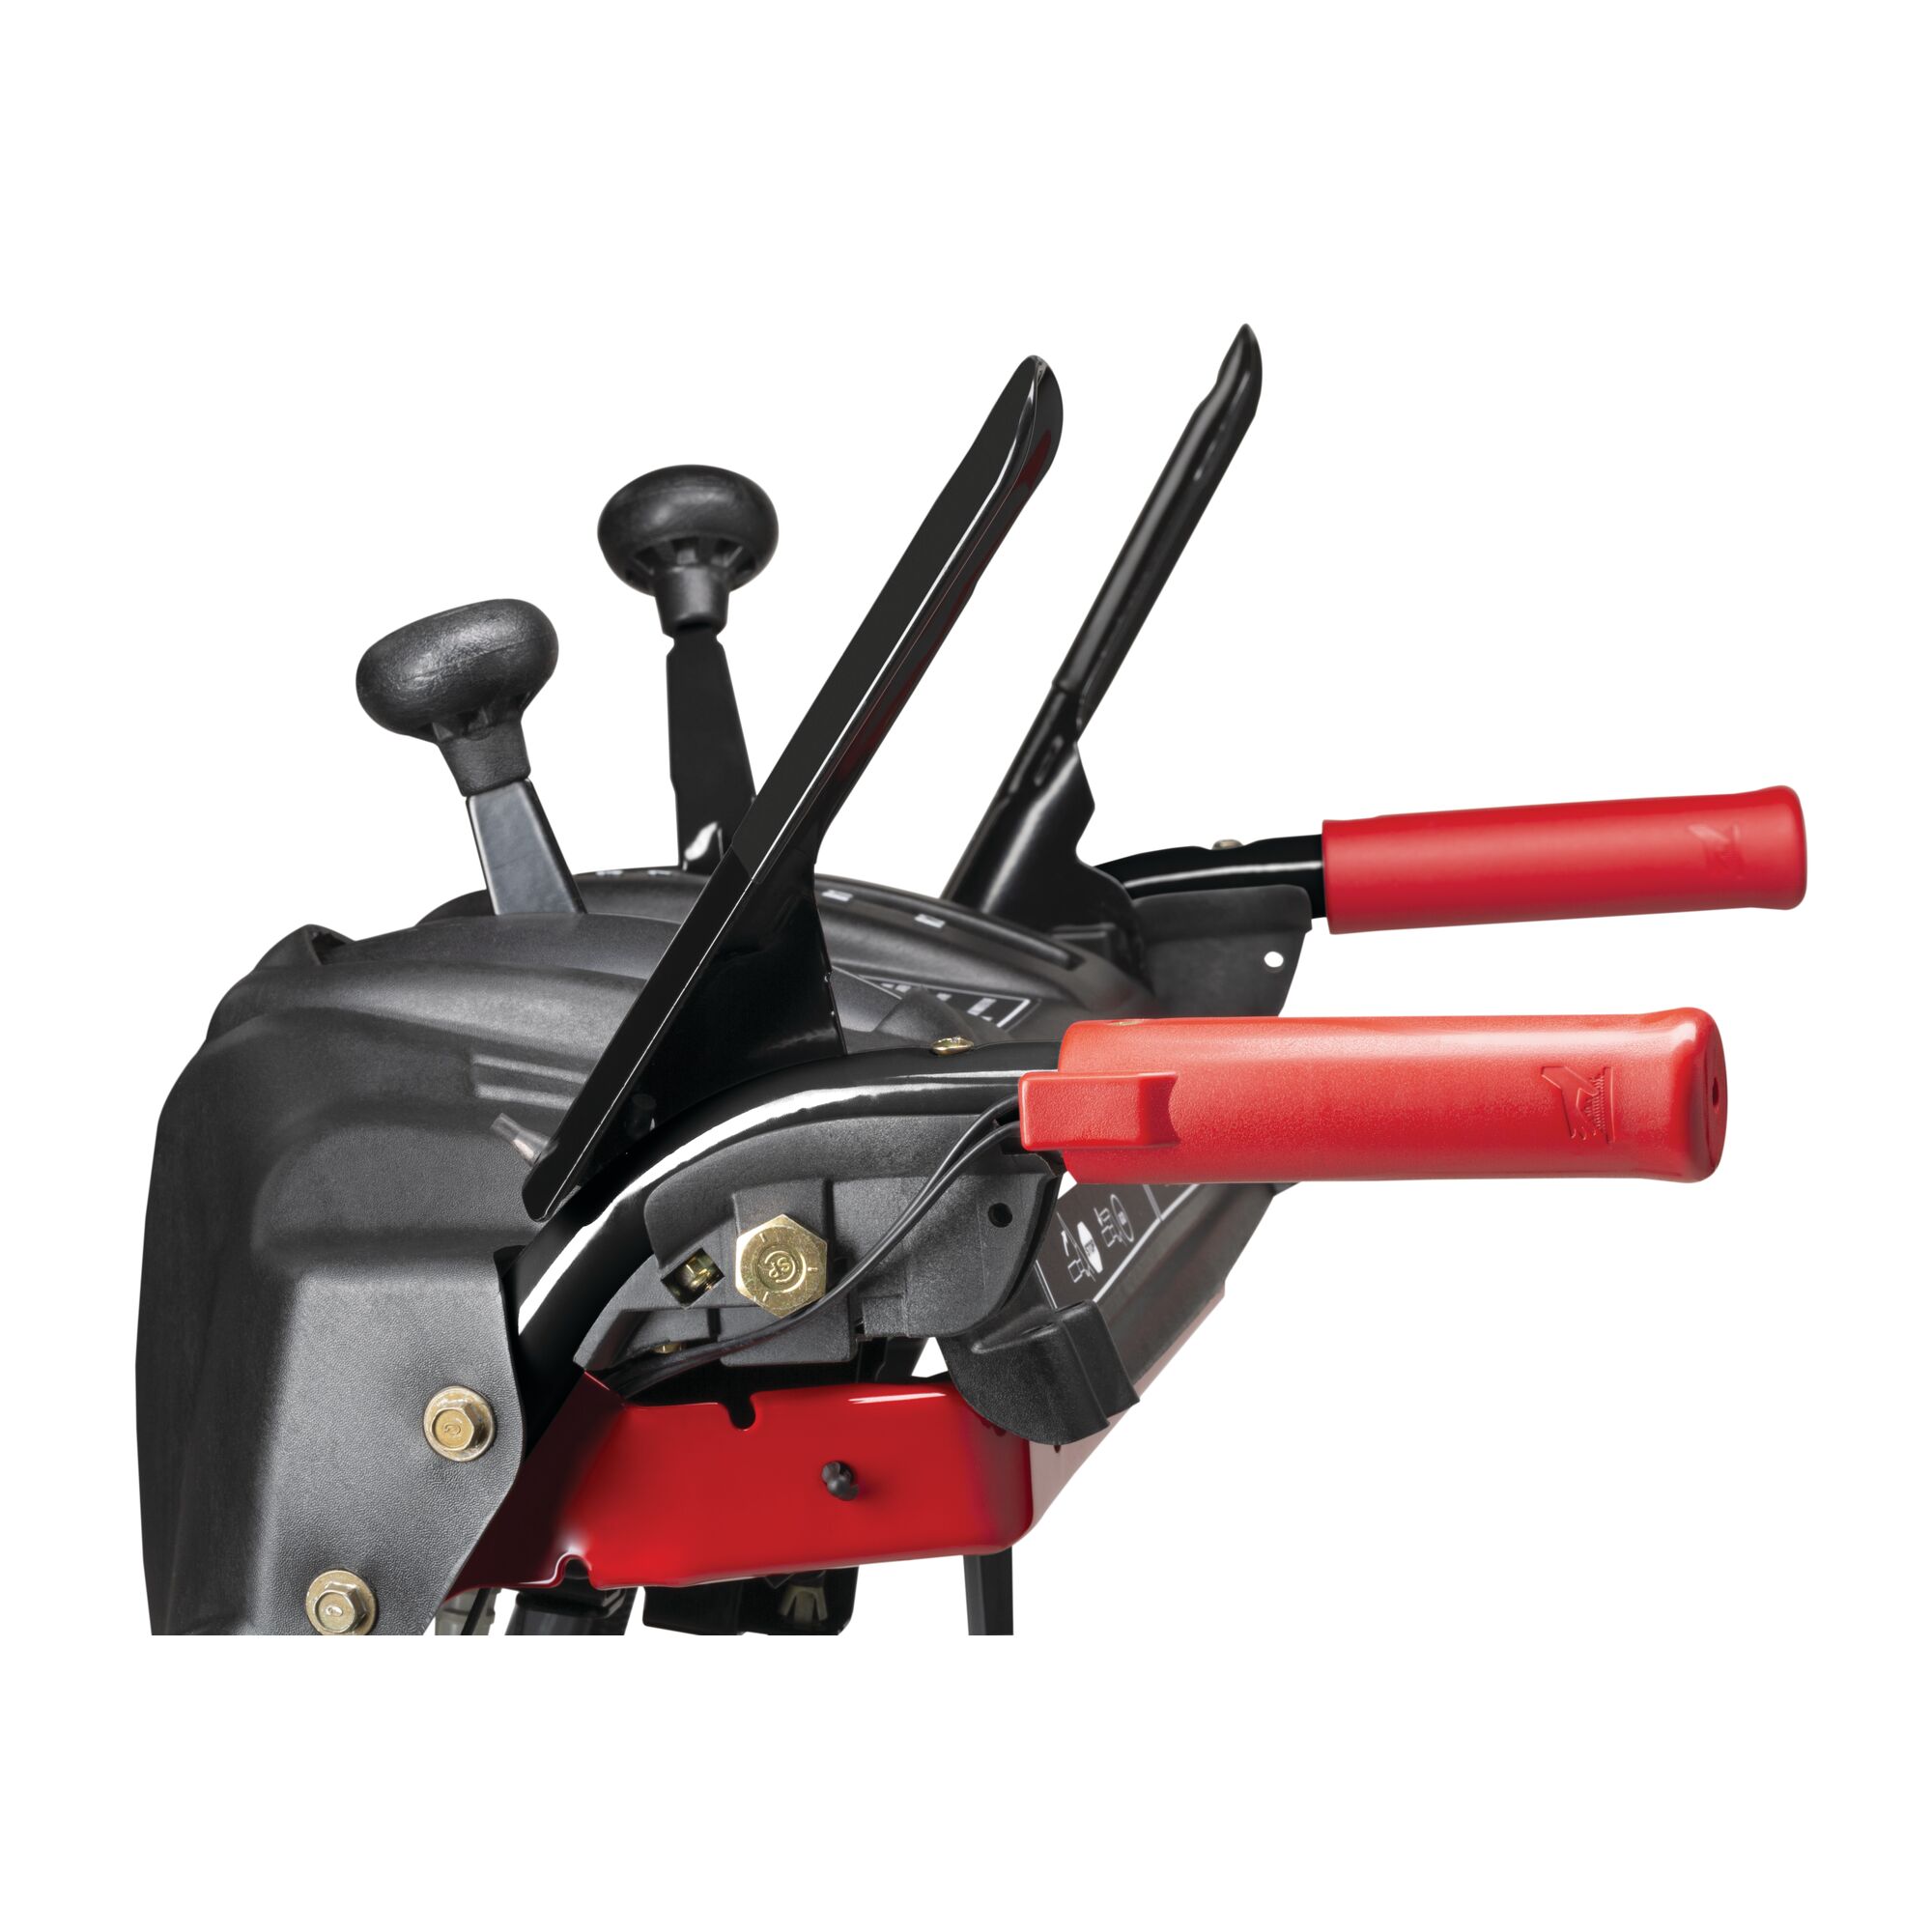 Heated hand grips feature in 28 inch 243 CC electric start two stage snow blower.